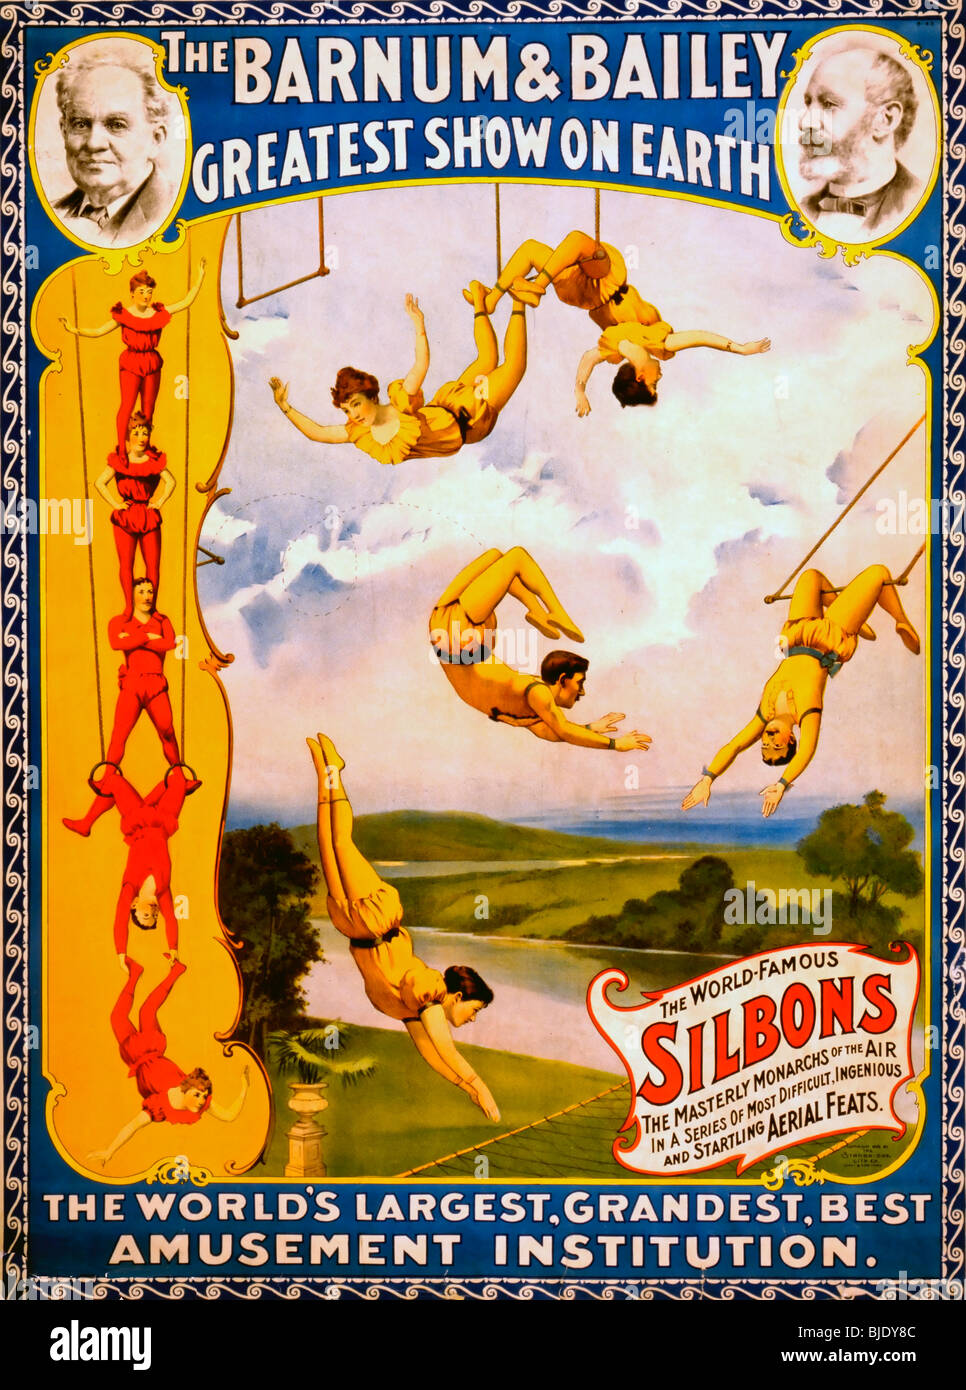 The Barnum & Bailey greatest show on earth The world's largest, grandest, best amusement institution - 1896 Circus Poster Stock Photo